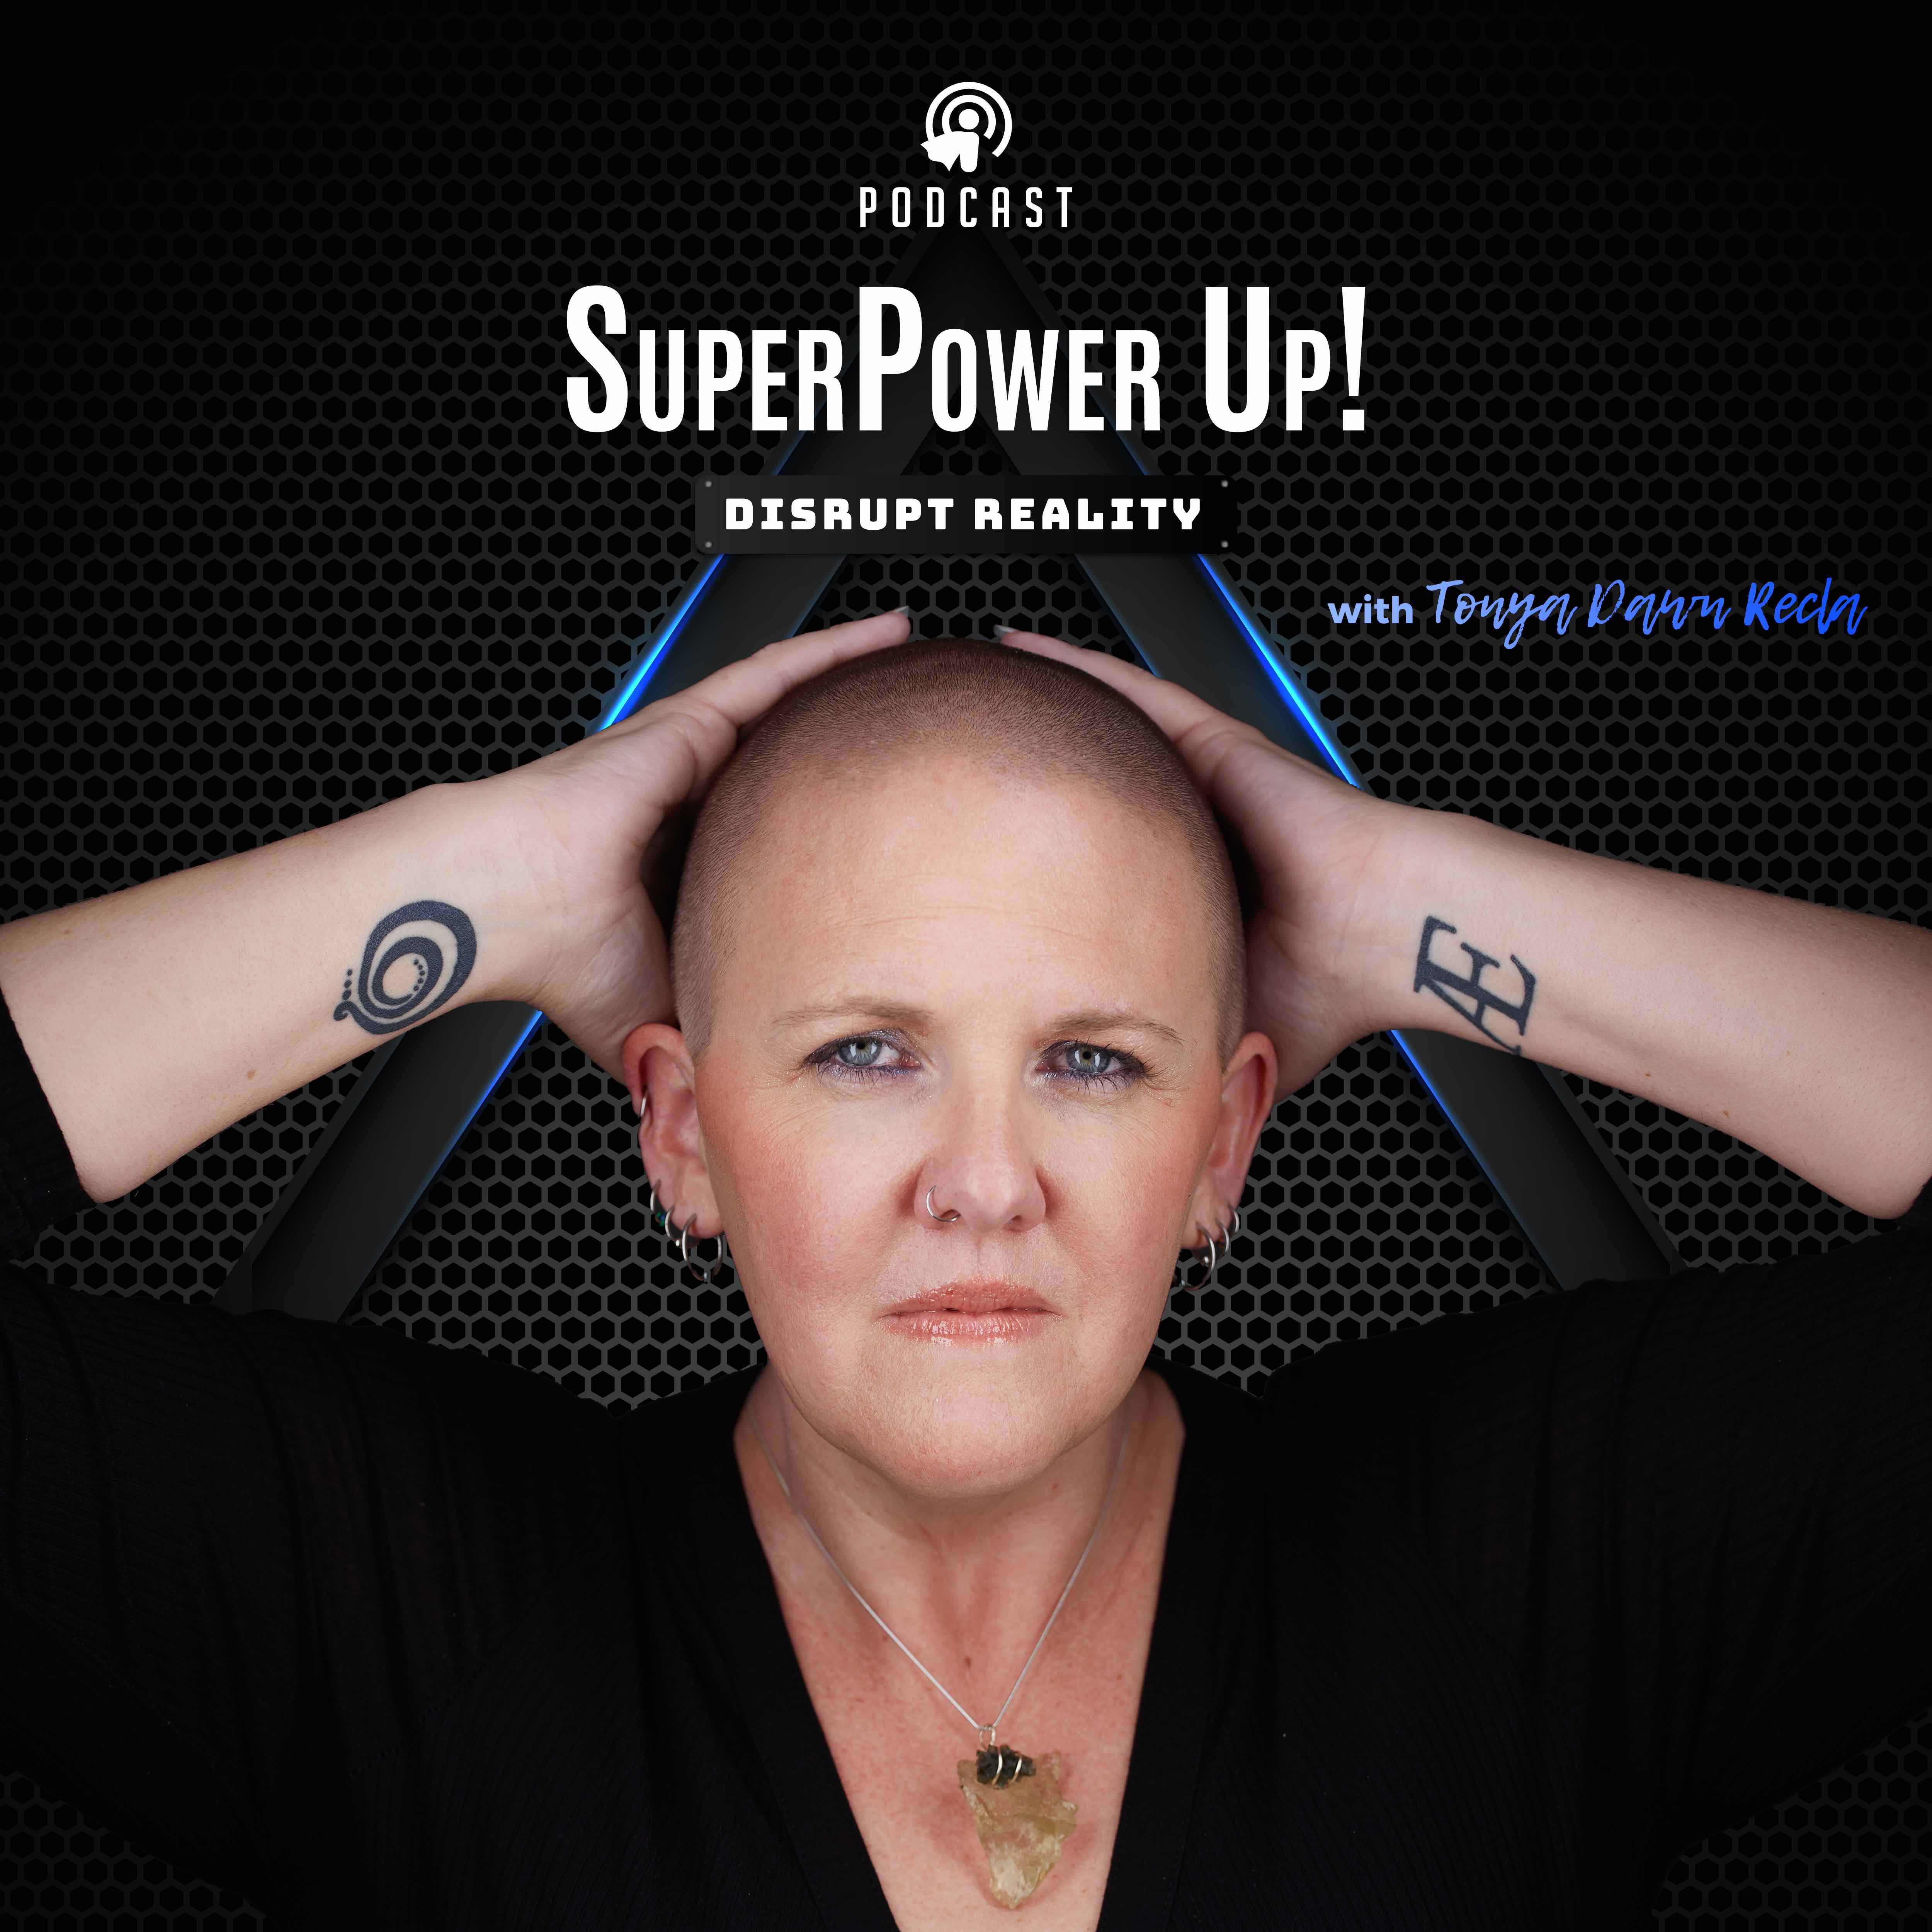 Super Power Up! Disrupt Reality - Listen Now! 